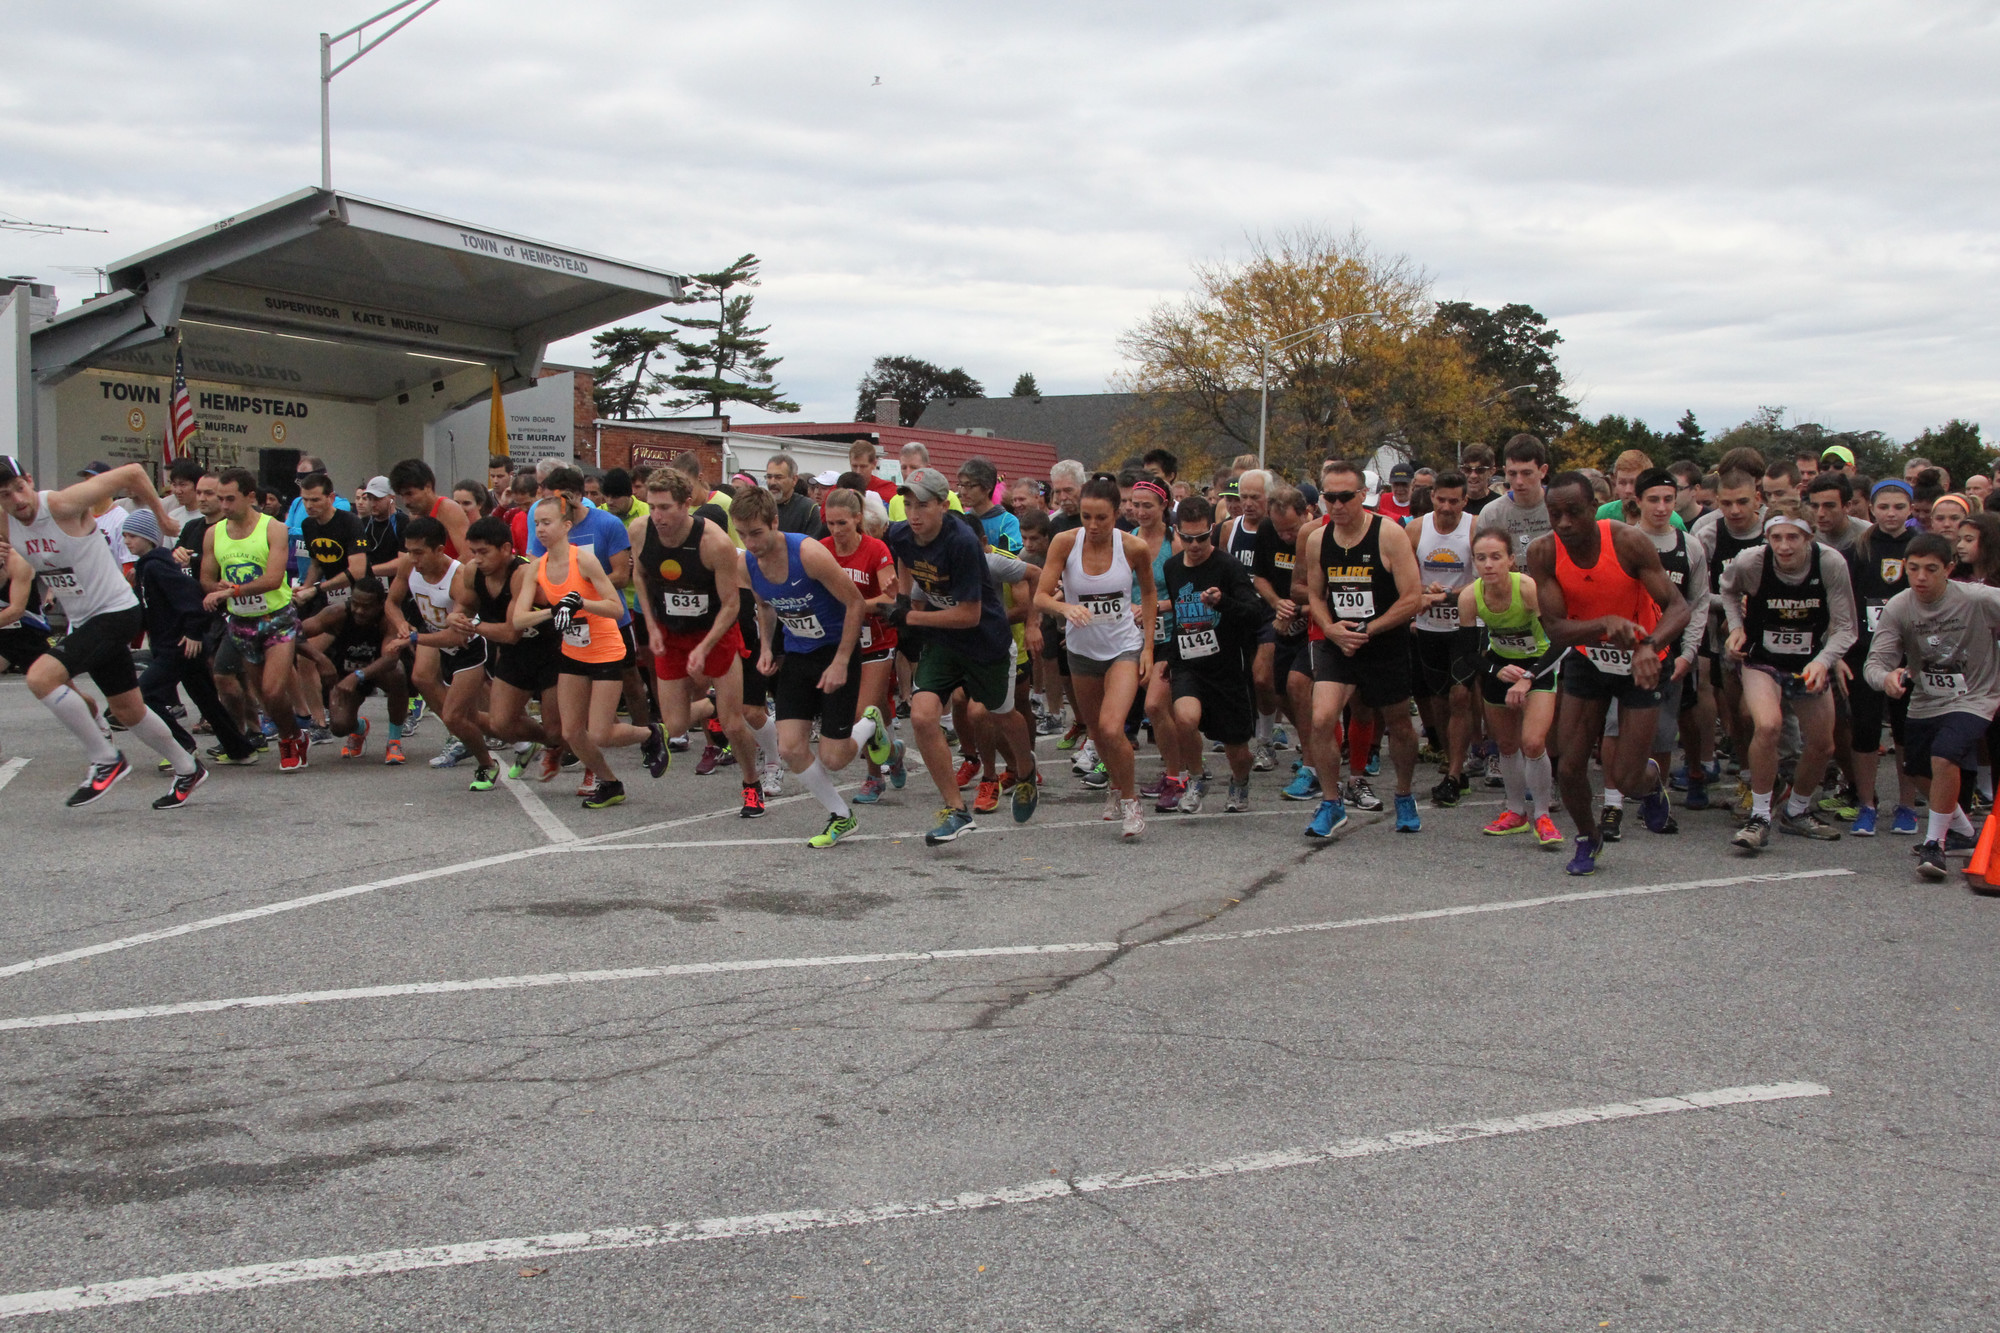 Hundreds of runners took part in the third annual John Theissen Freaky 5K in Wantagh on Oct. 19, which raised money for a children’s wish program.